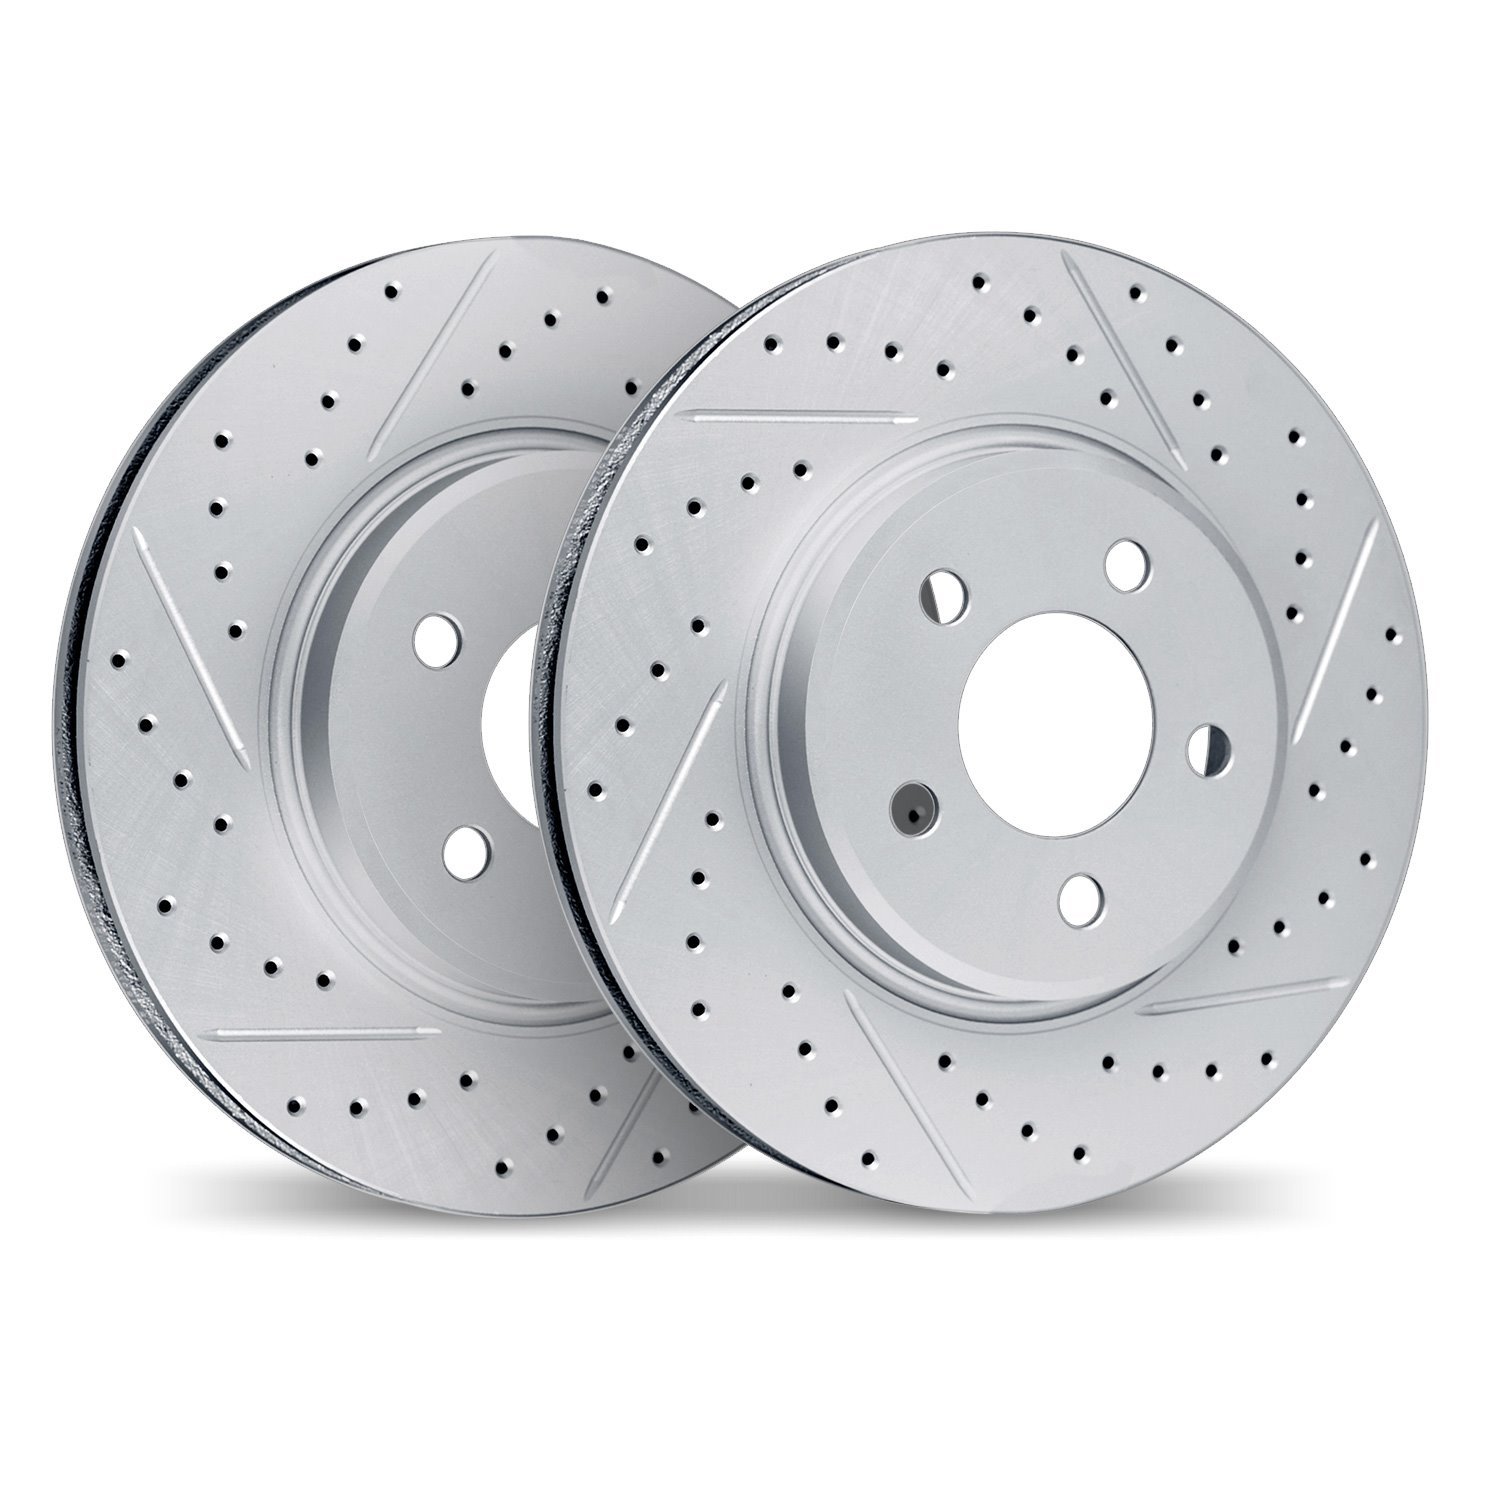 2002-11101 Geoperformance Drilled/Slotted Brake Rotors, Fits Select Land Rover, Position: Front